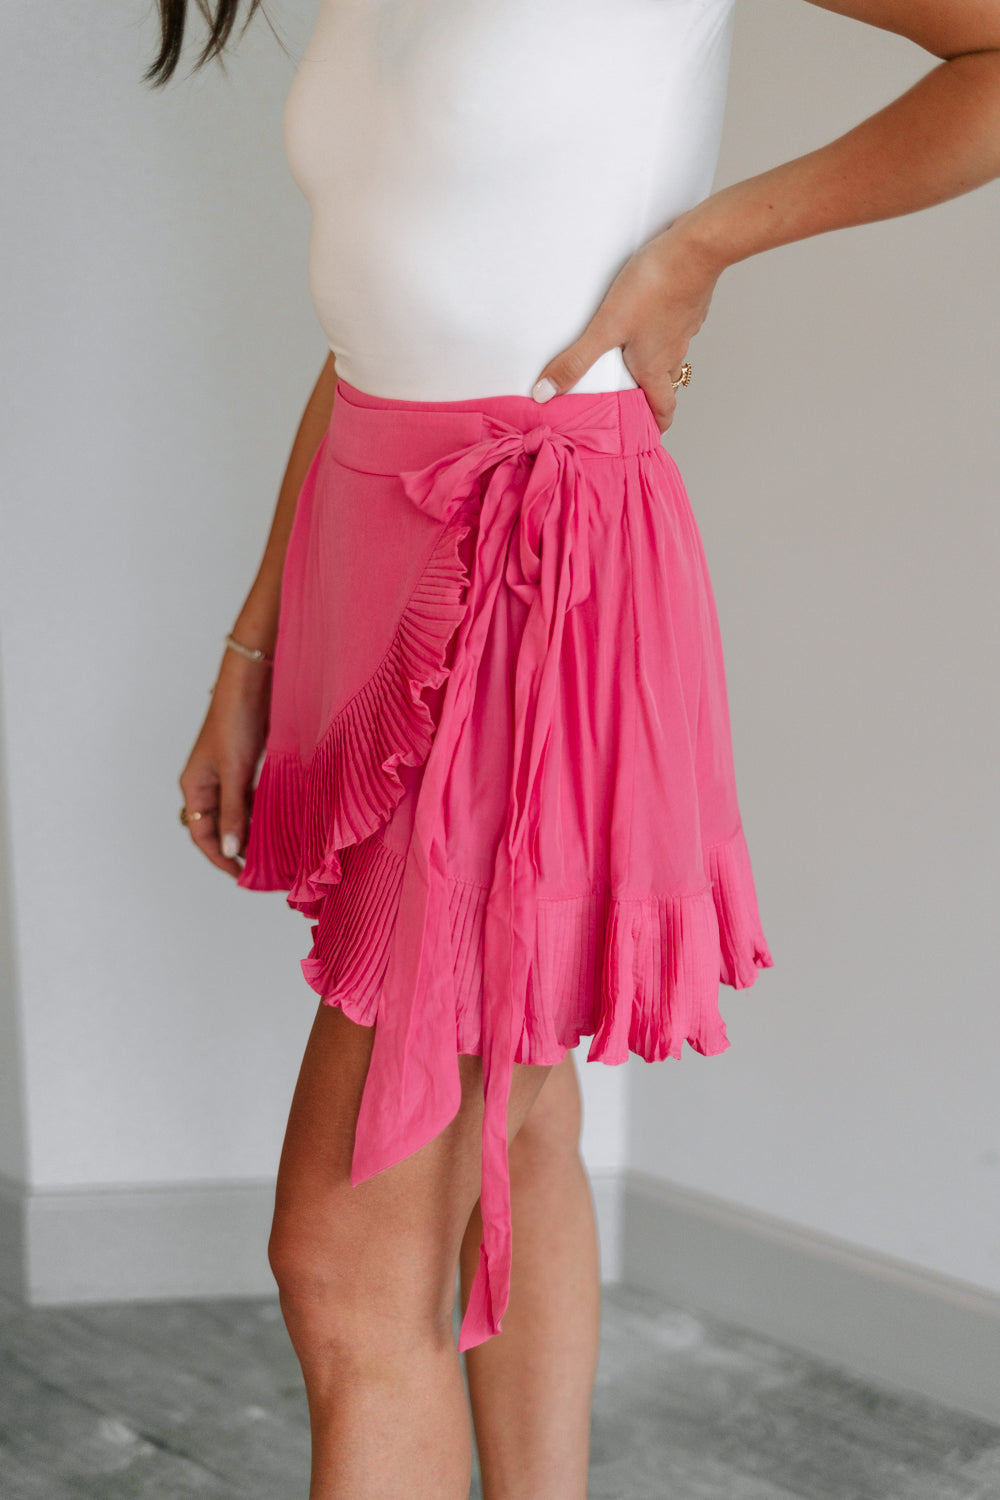 Side view of female model wearing the Gabriella Pink Ruffle Mini Skort which features Pink Lightweight Fabric, Pink Shorts Lining, Ruffle Pleated Hem Details and Side Tie Detail